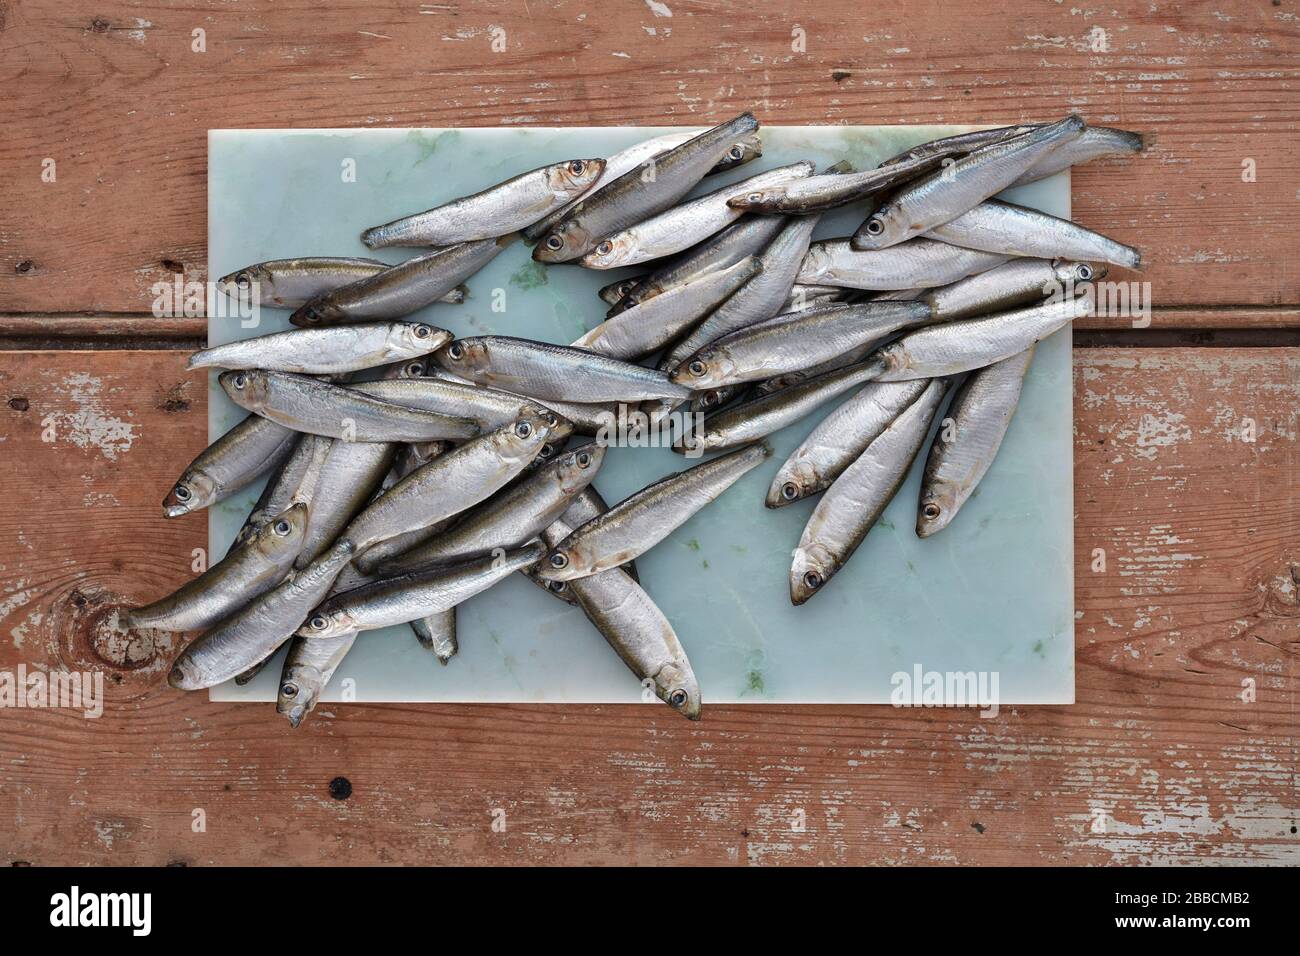 white bait whitebait fish seafood silver small eat whole board